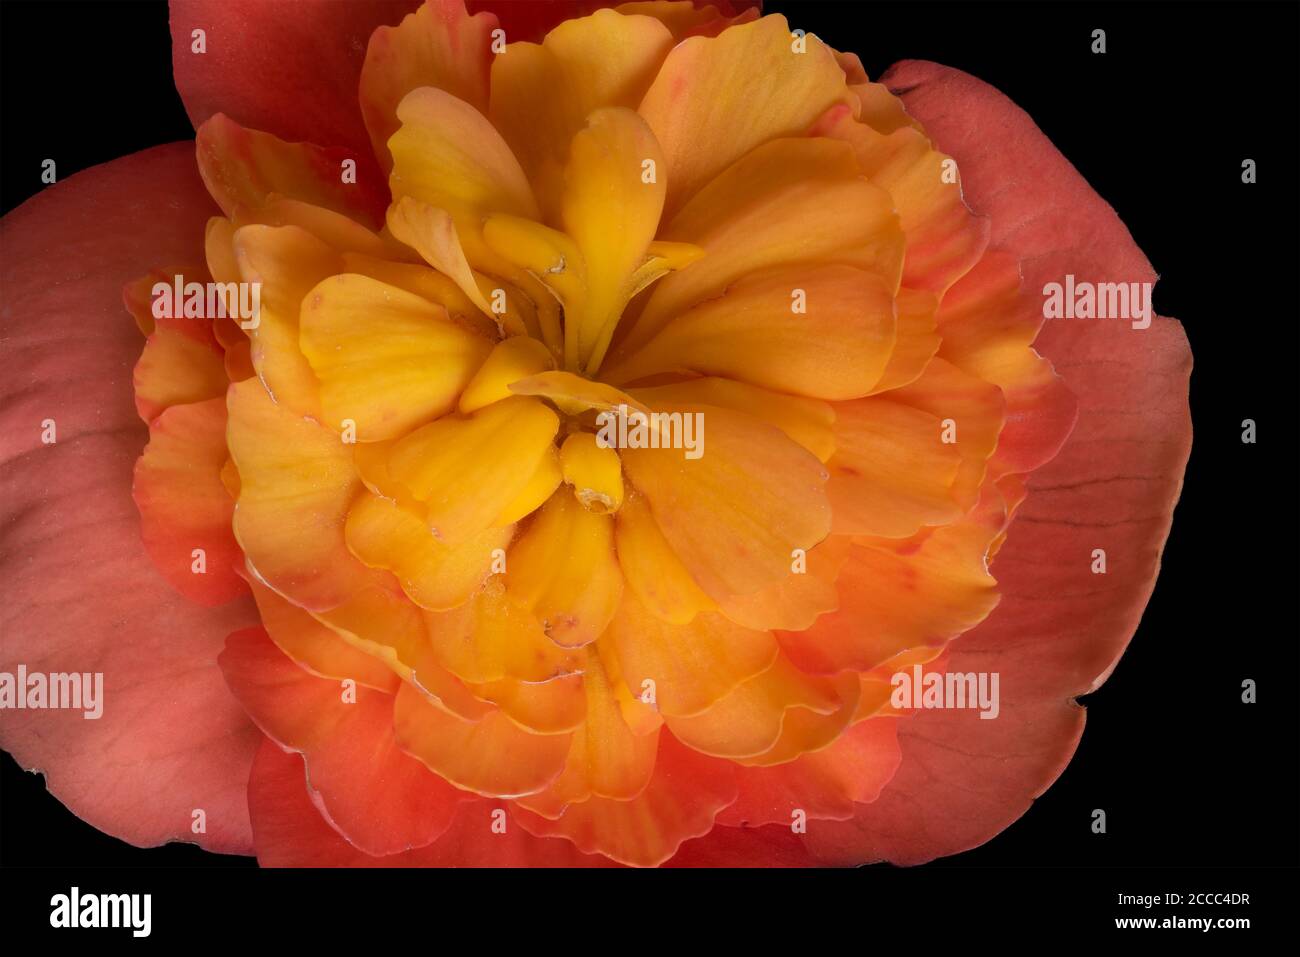 macro of the center of a yellow orange begonia blossom on black background Stock Photo